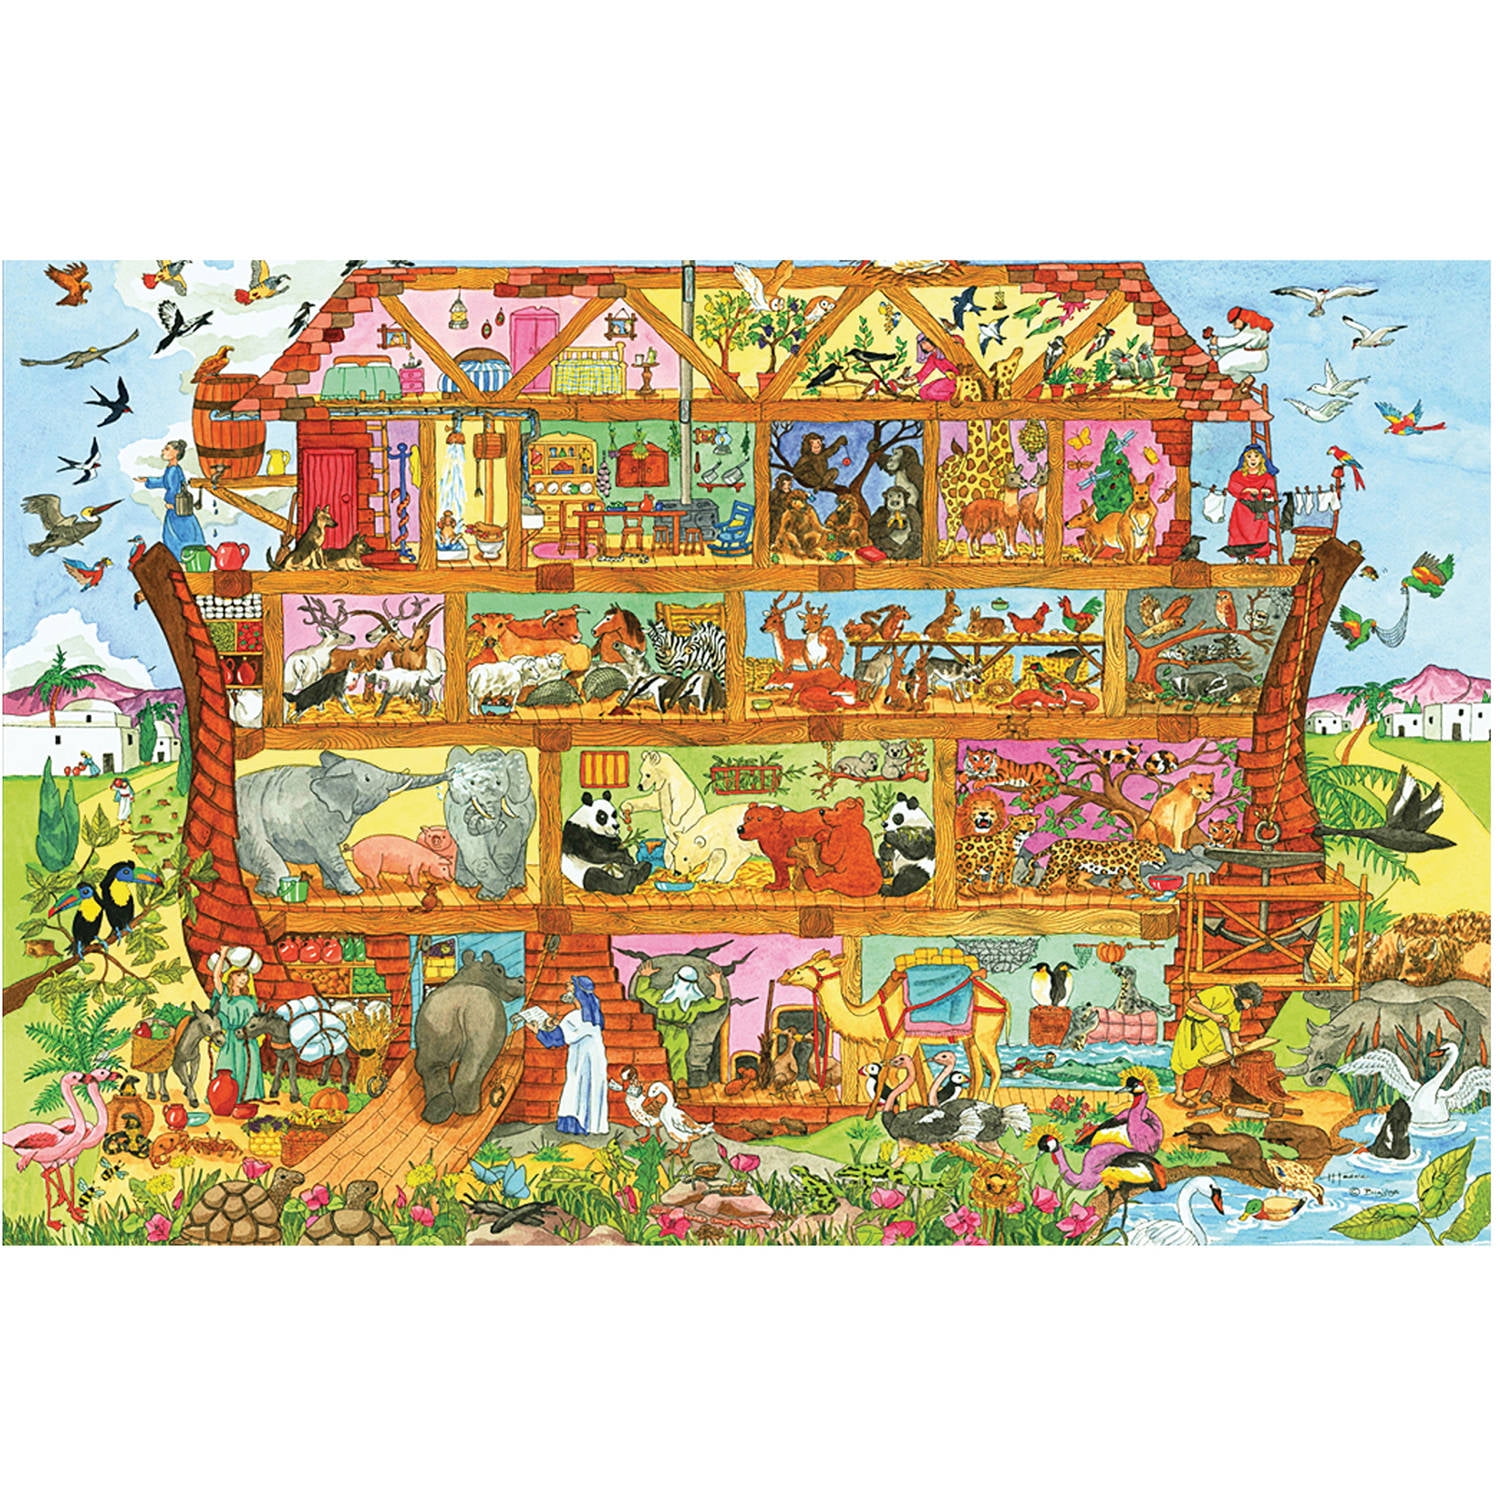 Details about   Dallo Set of 2 24 Piece Childrens Puzzles Noahs Ark and Dinosaurs 5 x 7 New 